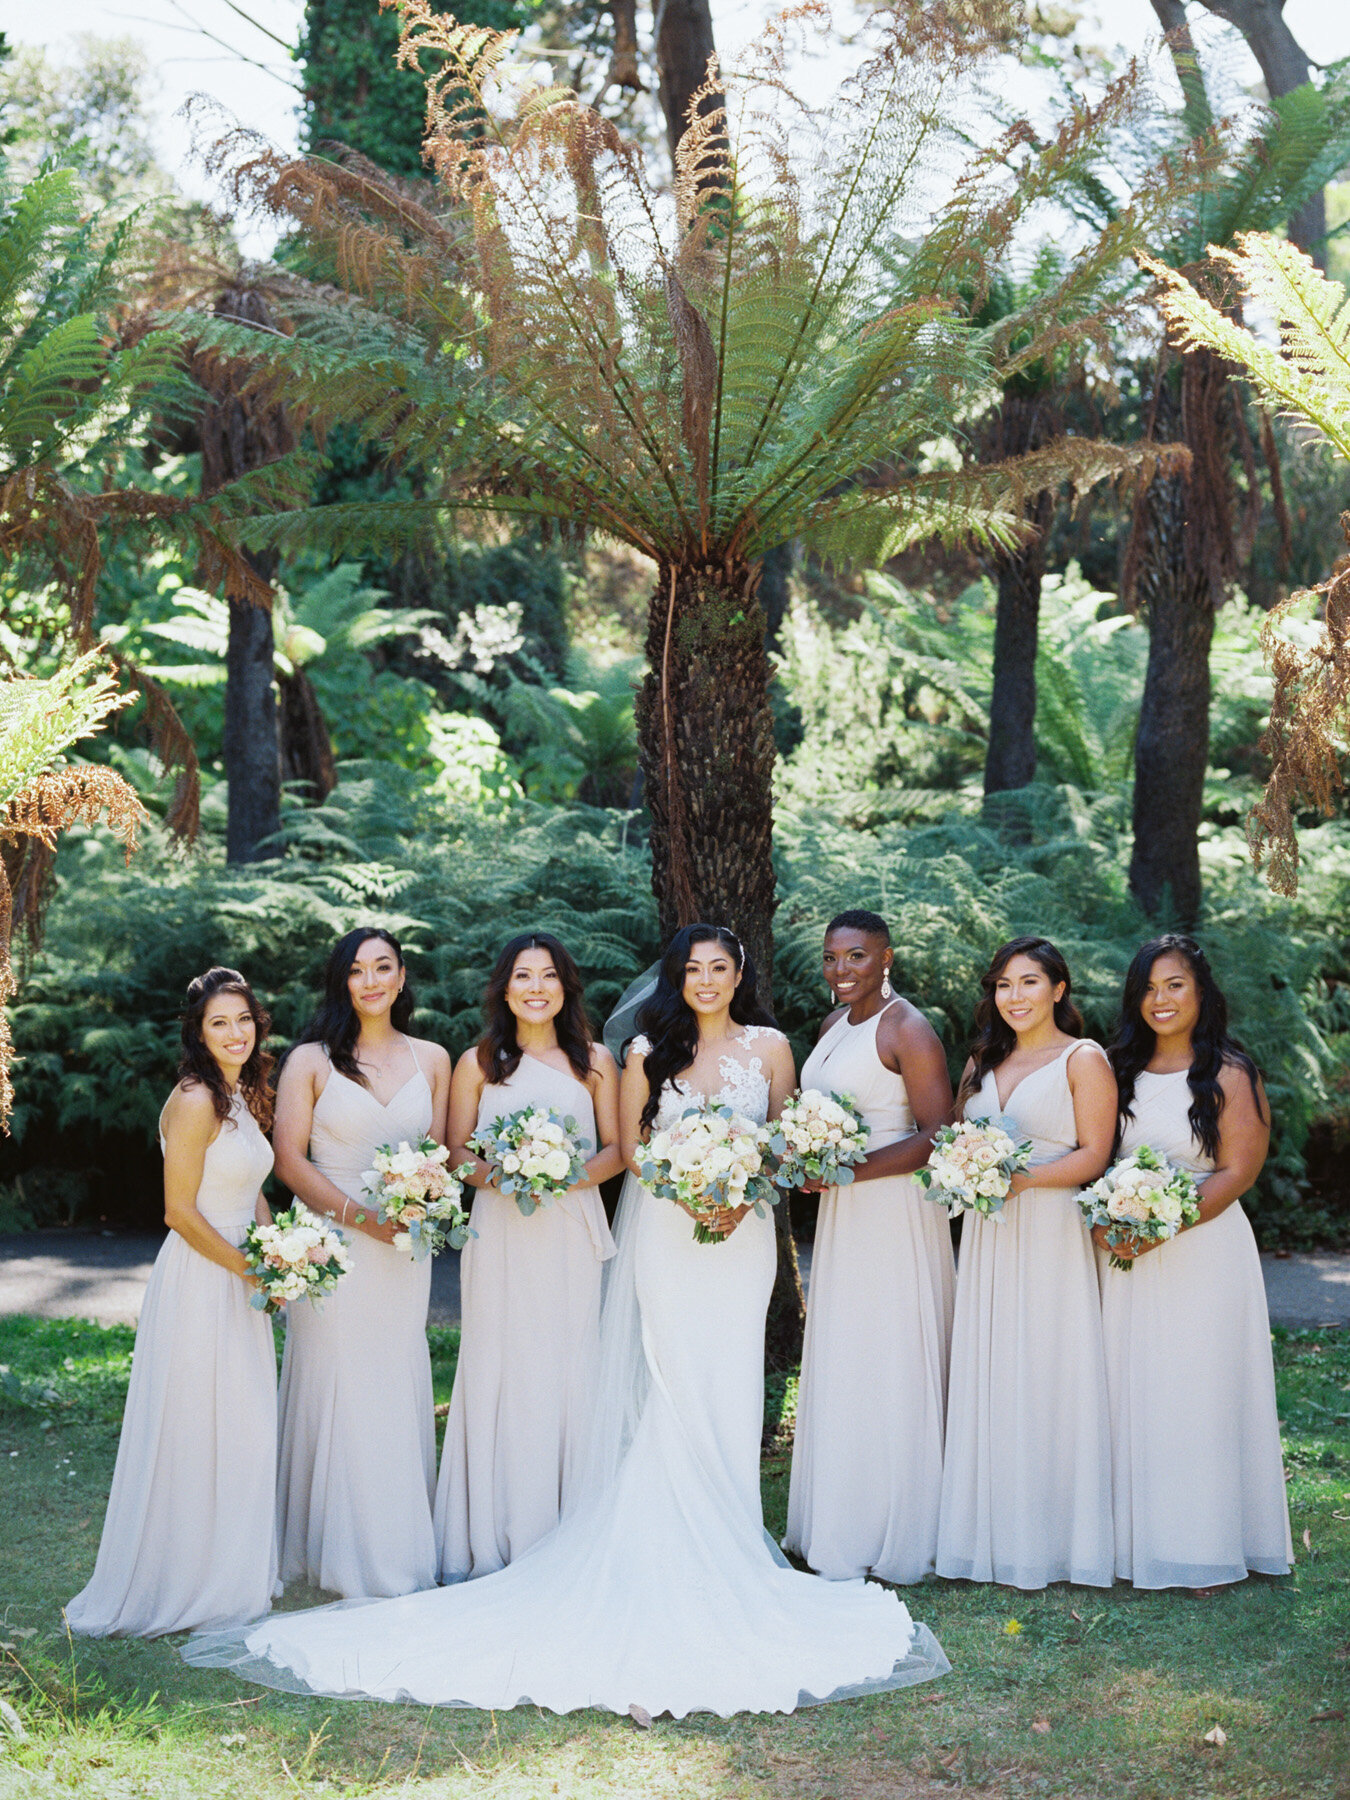 Conservatory-Of-Flowers-Wedding-Videographer-Outlive-Creative_028.jpg